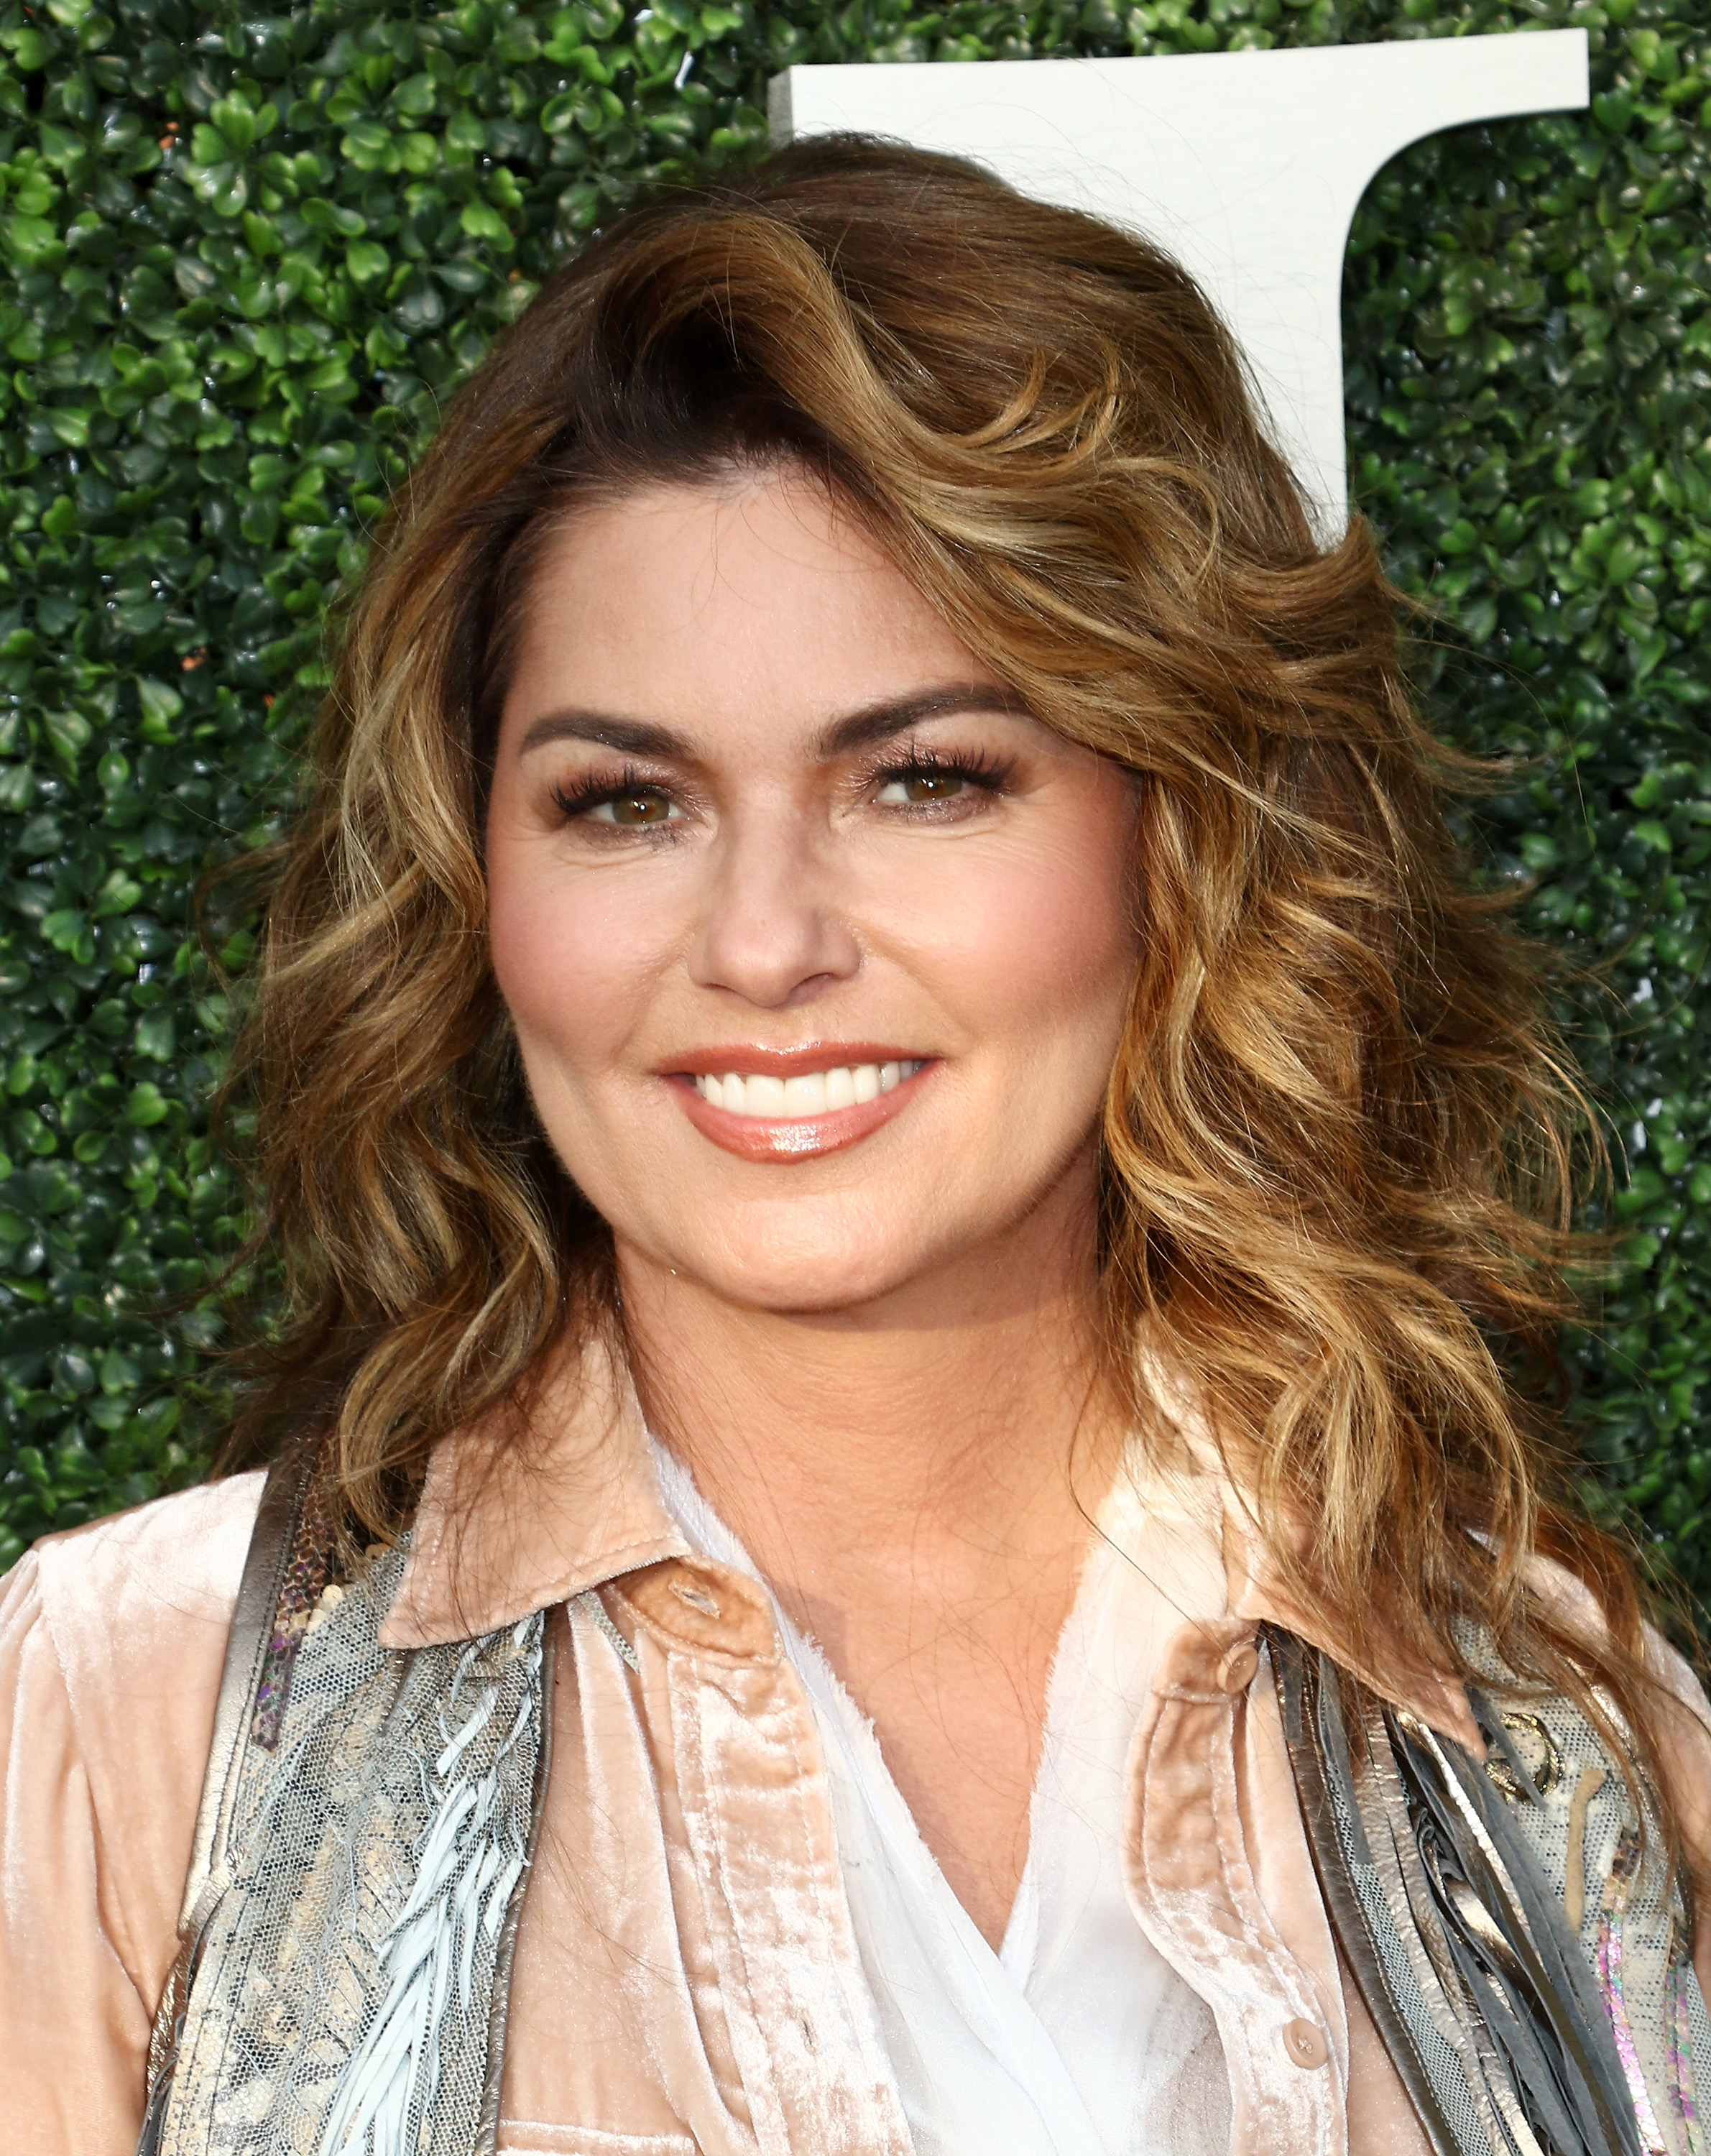 Shania Twain, pictured in 2017, attends the 17th Annual USTA Foundation Opening Night Gala